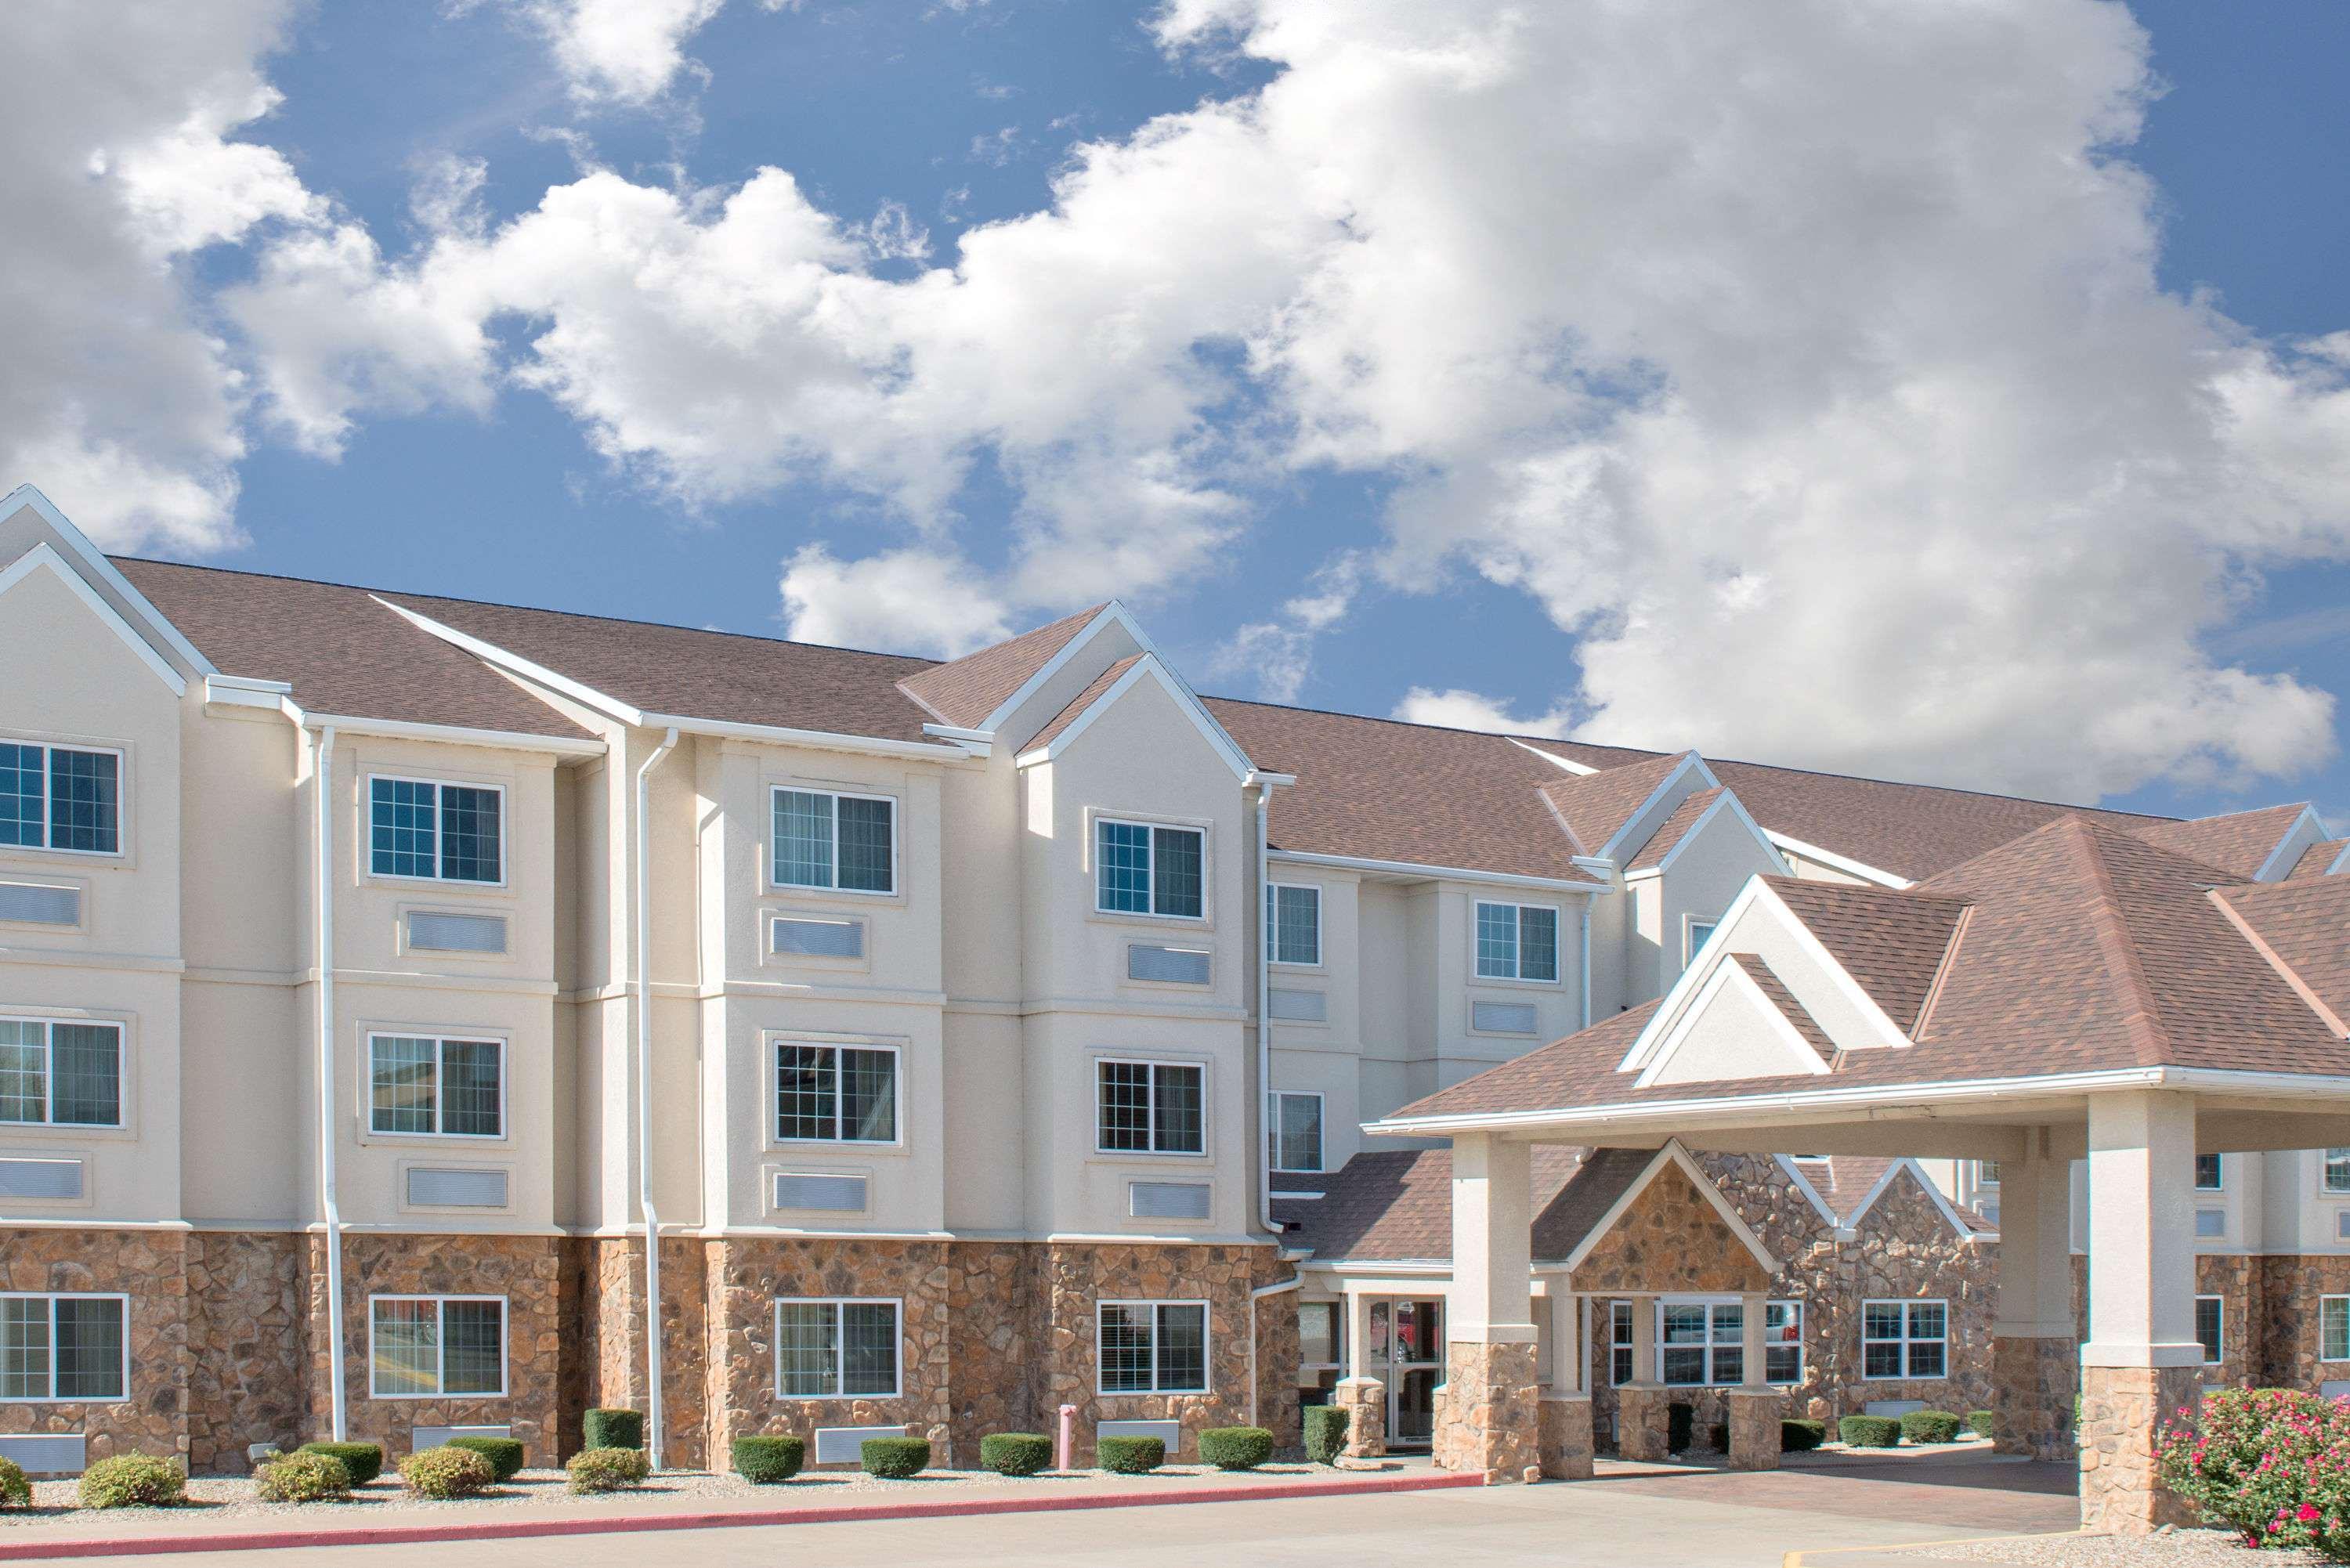 Microtel Inn & Suites by Wyndham Quincy image